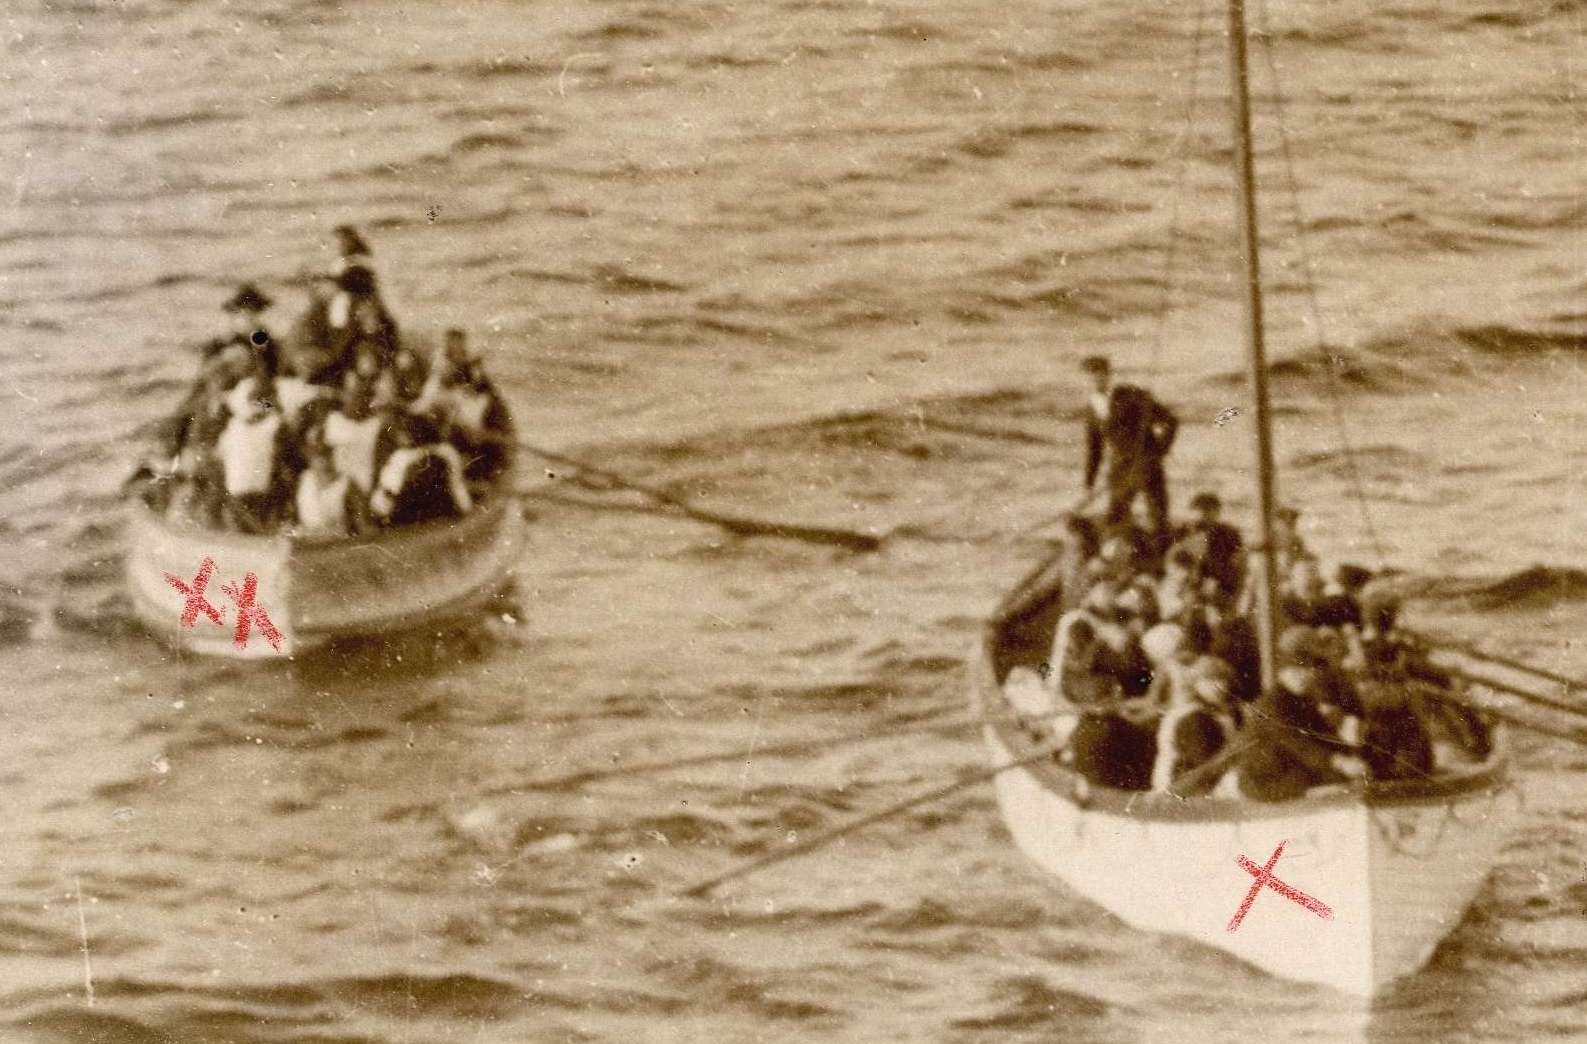 Photograph of Two Lifeboats Carrying Titanic Survivors